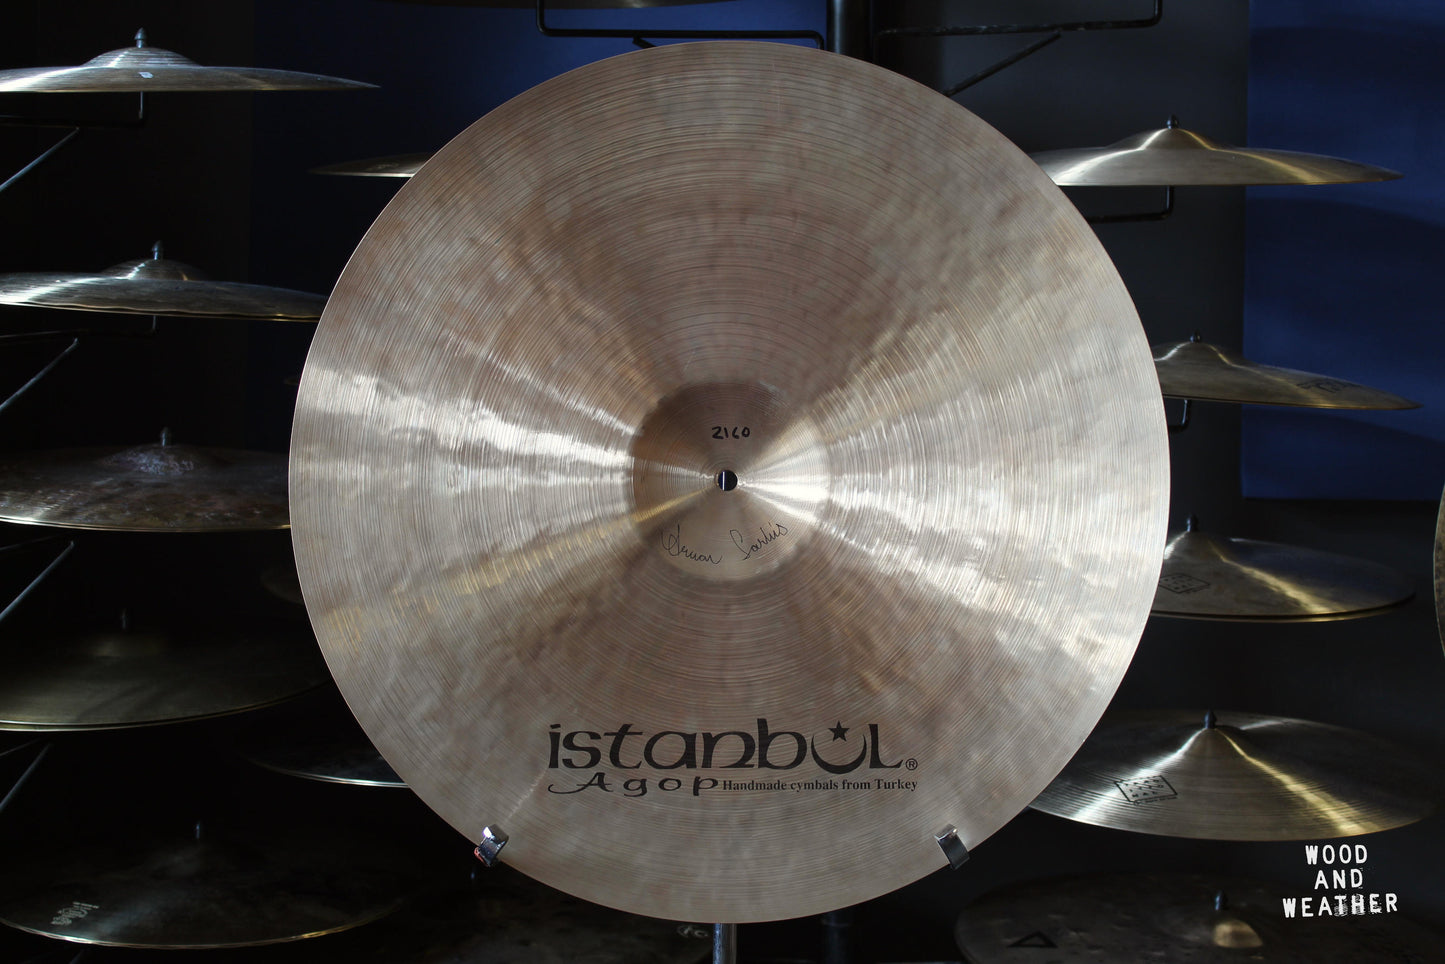 Used Istanbul Agop 22" Sultan Jazz Ride Cymbal 2160g